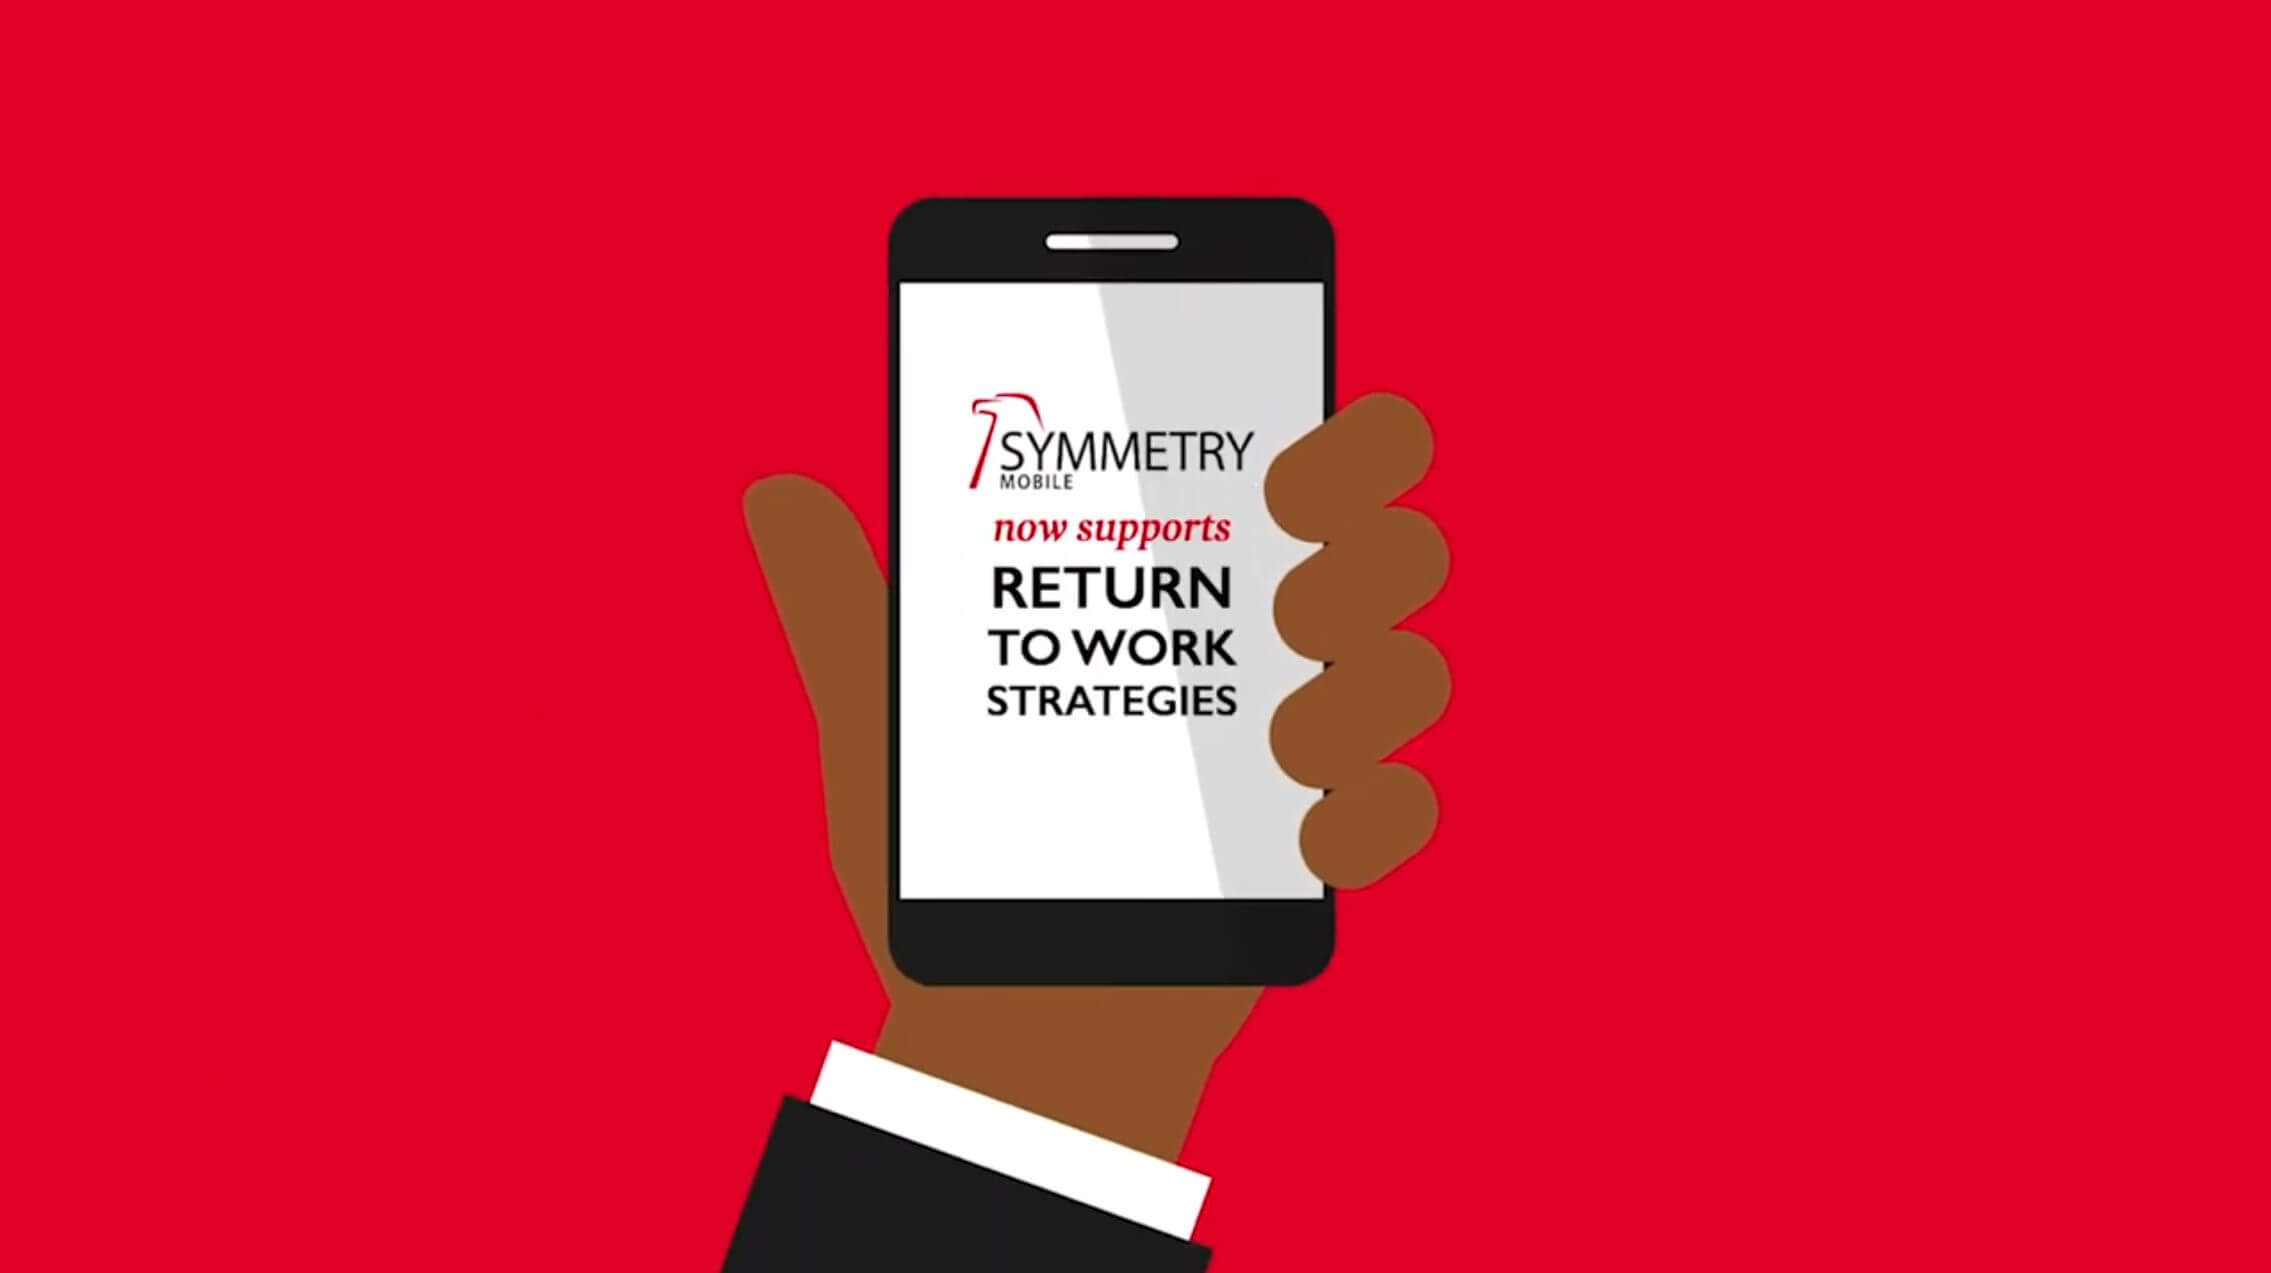 Symmetry Mobile supports Return to Work strategies